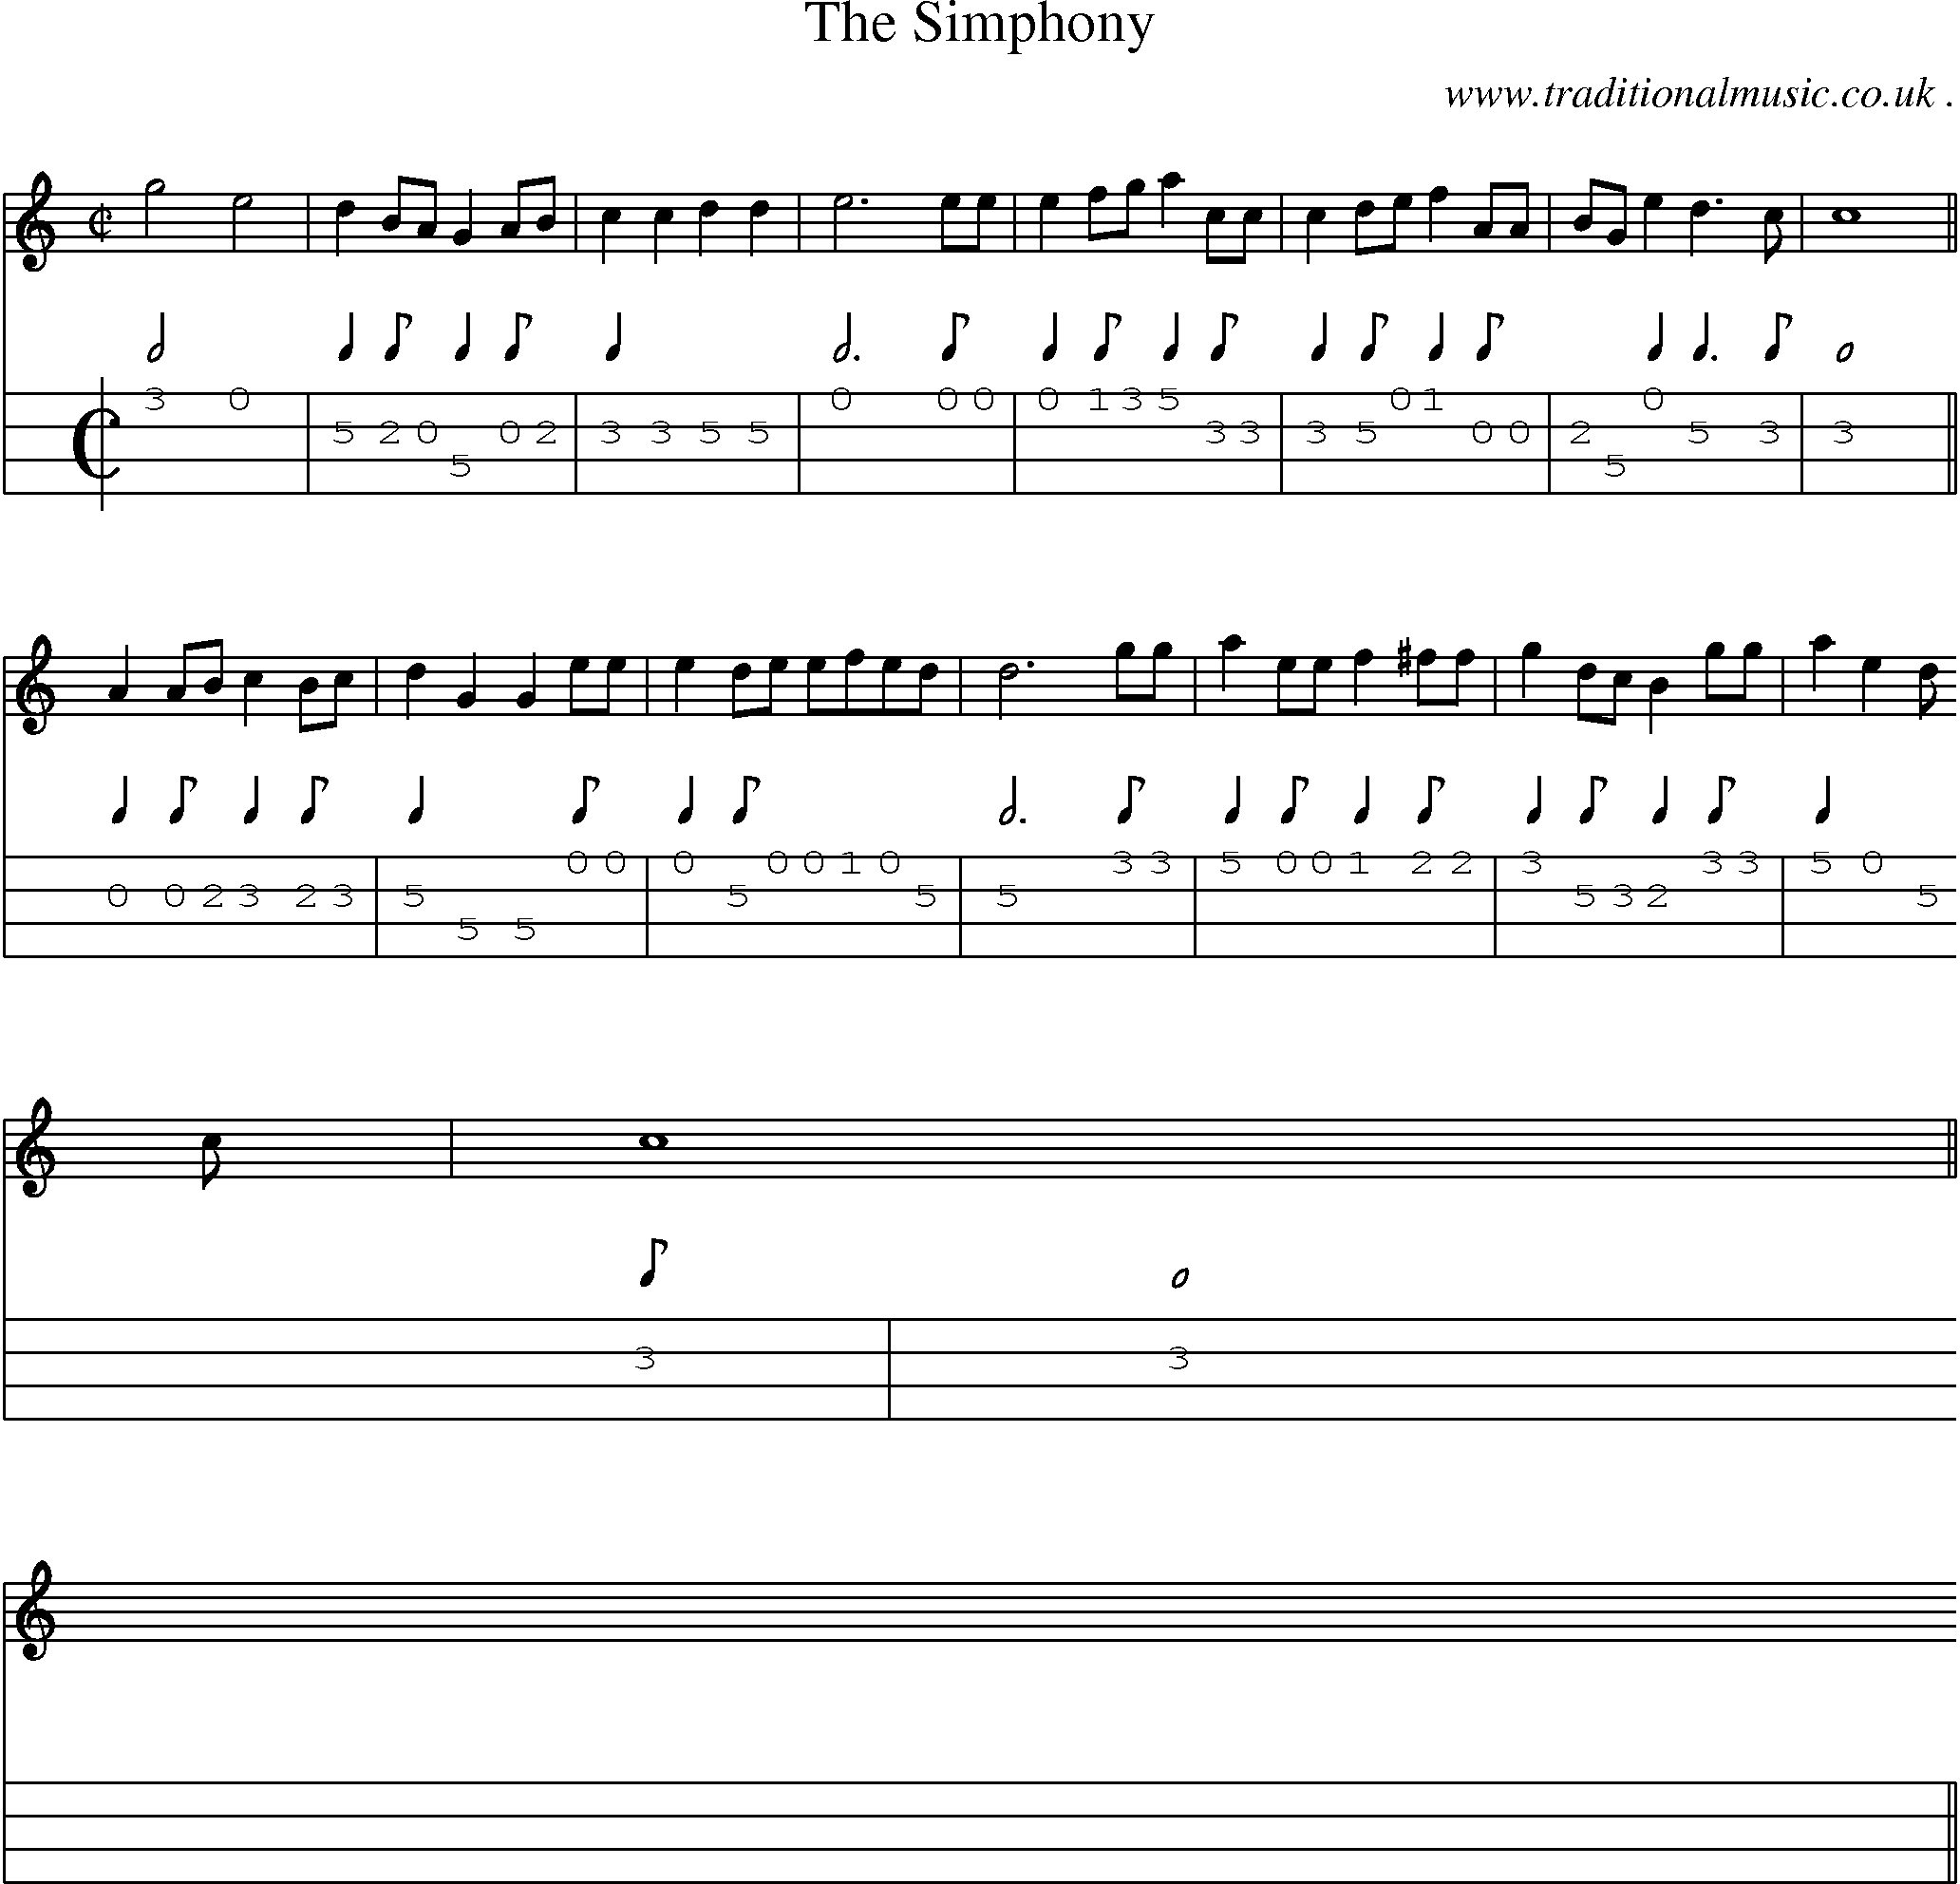 Sheet-Music and Mandolin Tabs for The Simphony